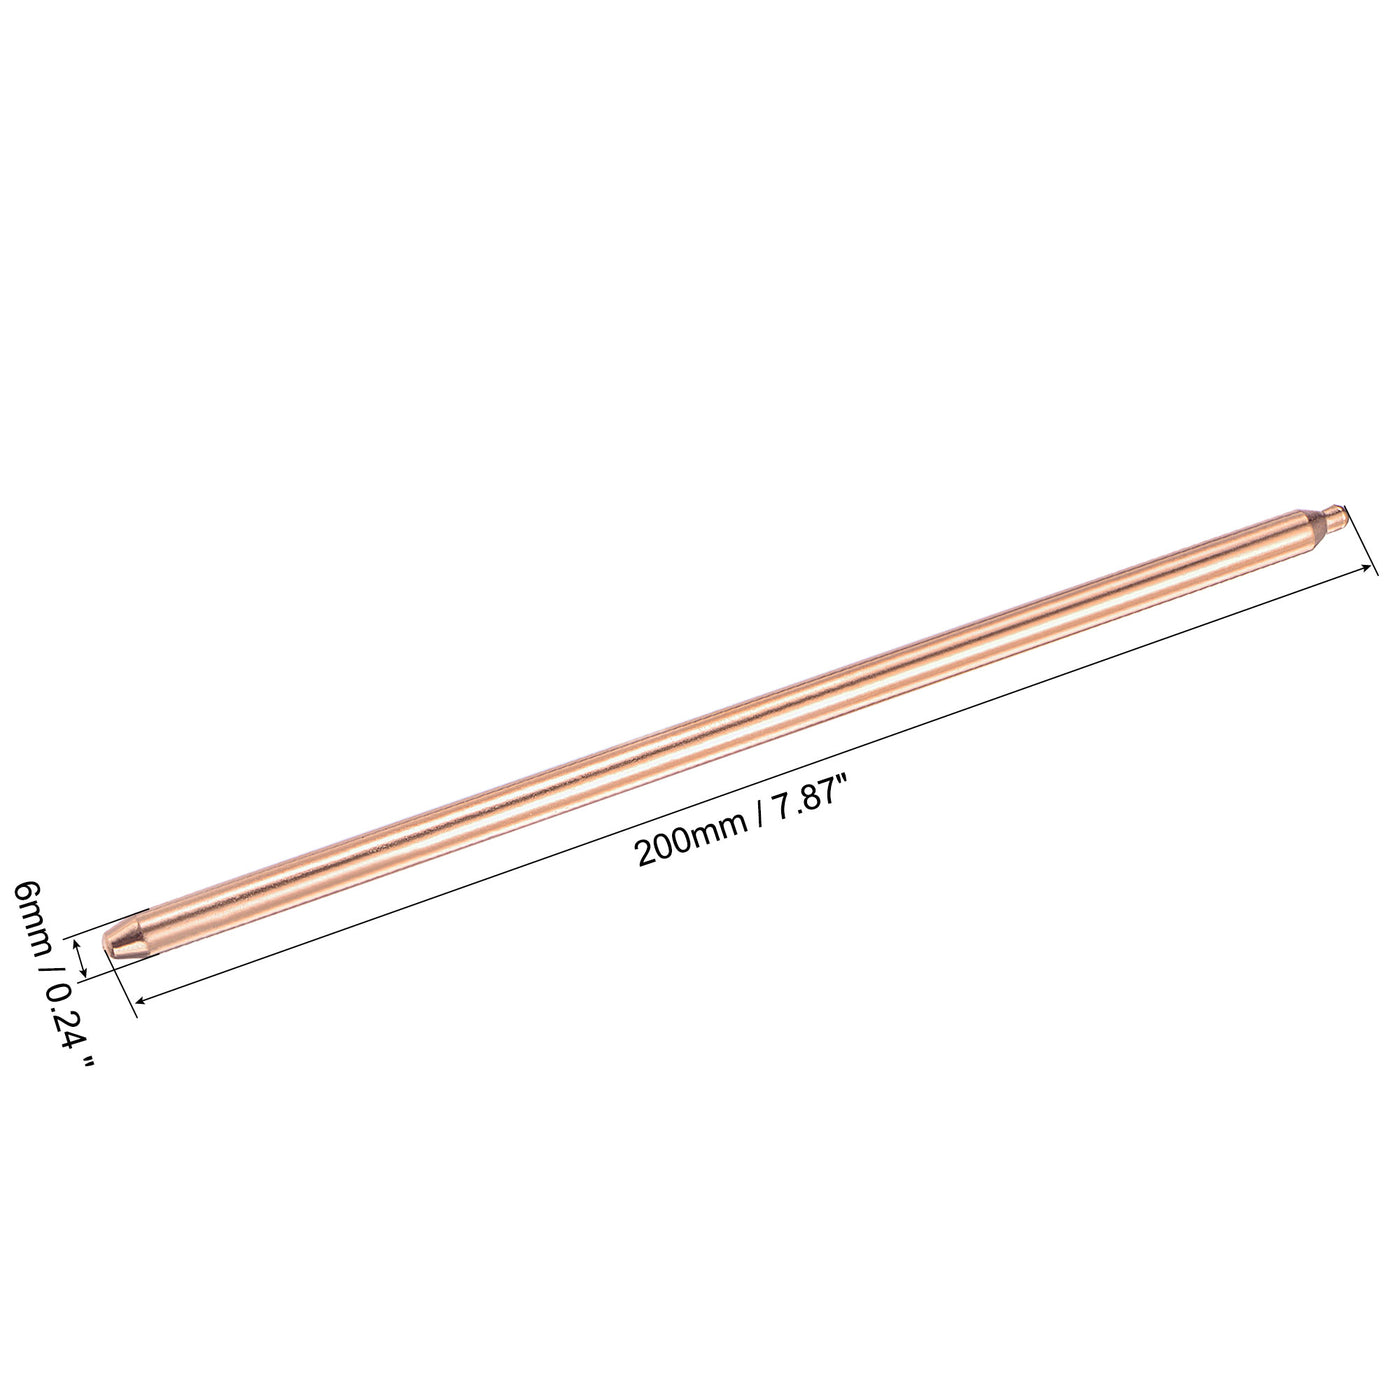 uxcell Uxcell Copper Round Heat Pipe for Cooling Laptop CPU GPU Heatsink 6mm x 200mm